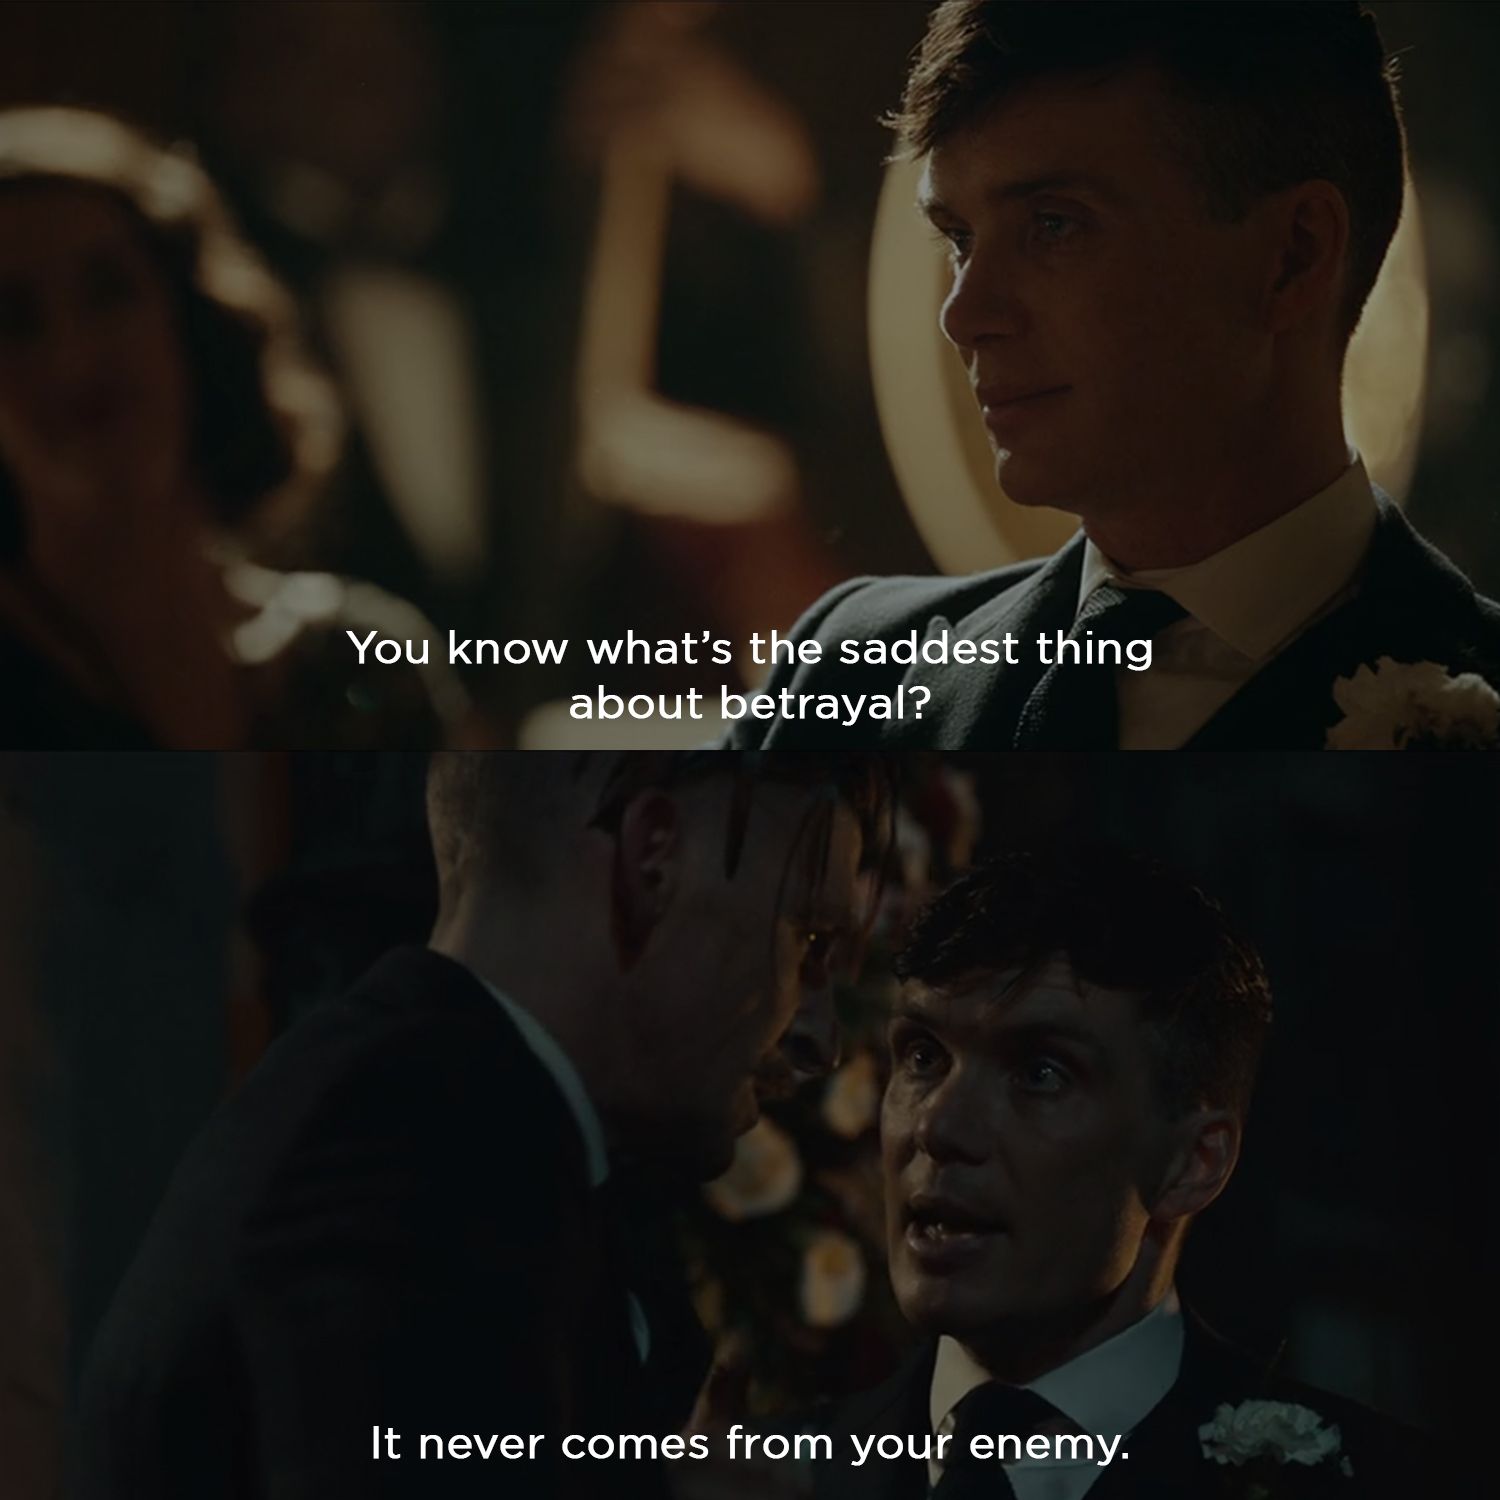 Shut Dem All: Thomas Shelby Quotes (with Picture). Peaky blinders quotes, Best movie quotes, Movie quote tattoos